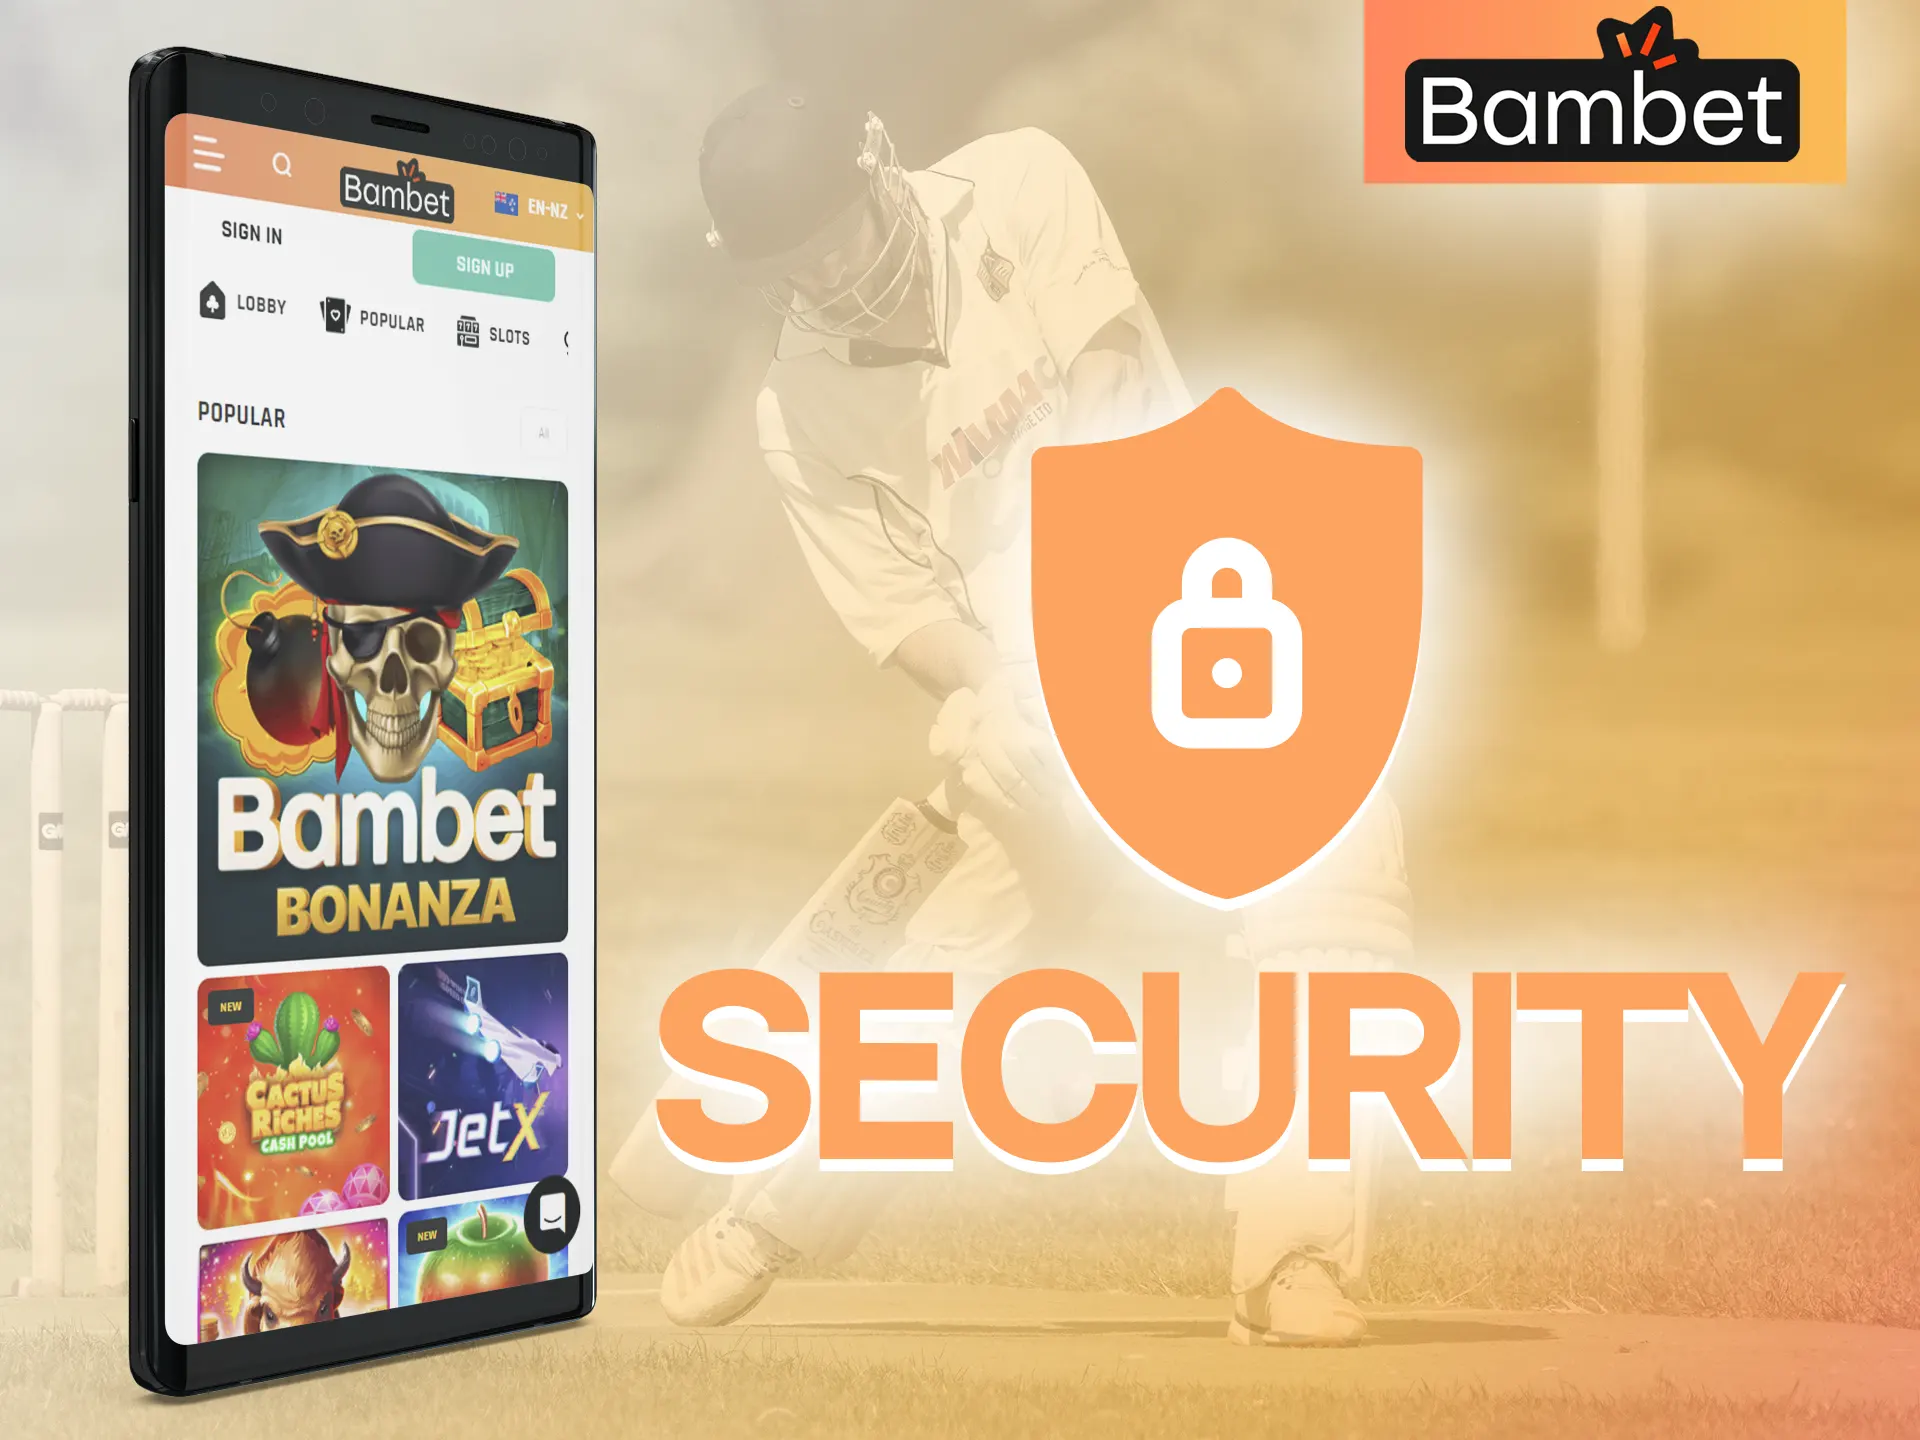 In the Bambet app, your data is secure.